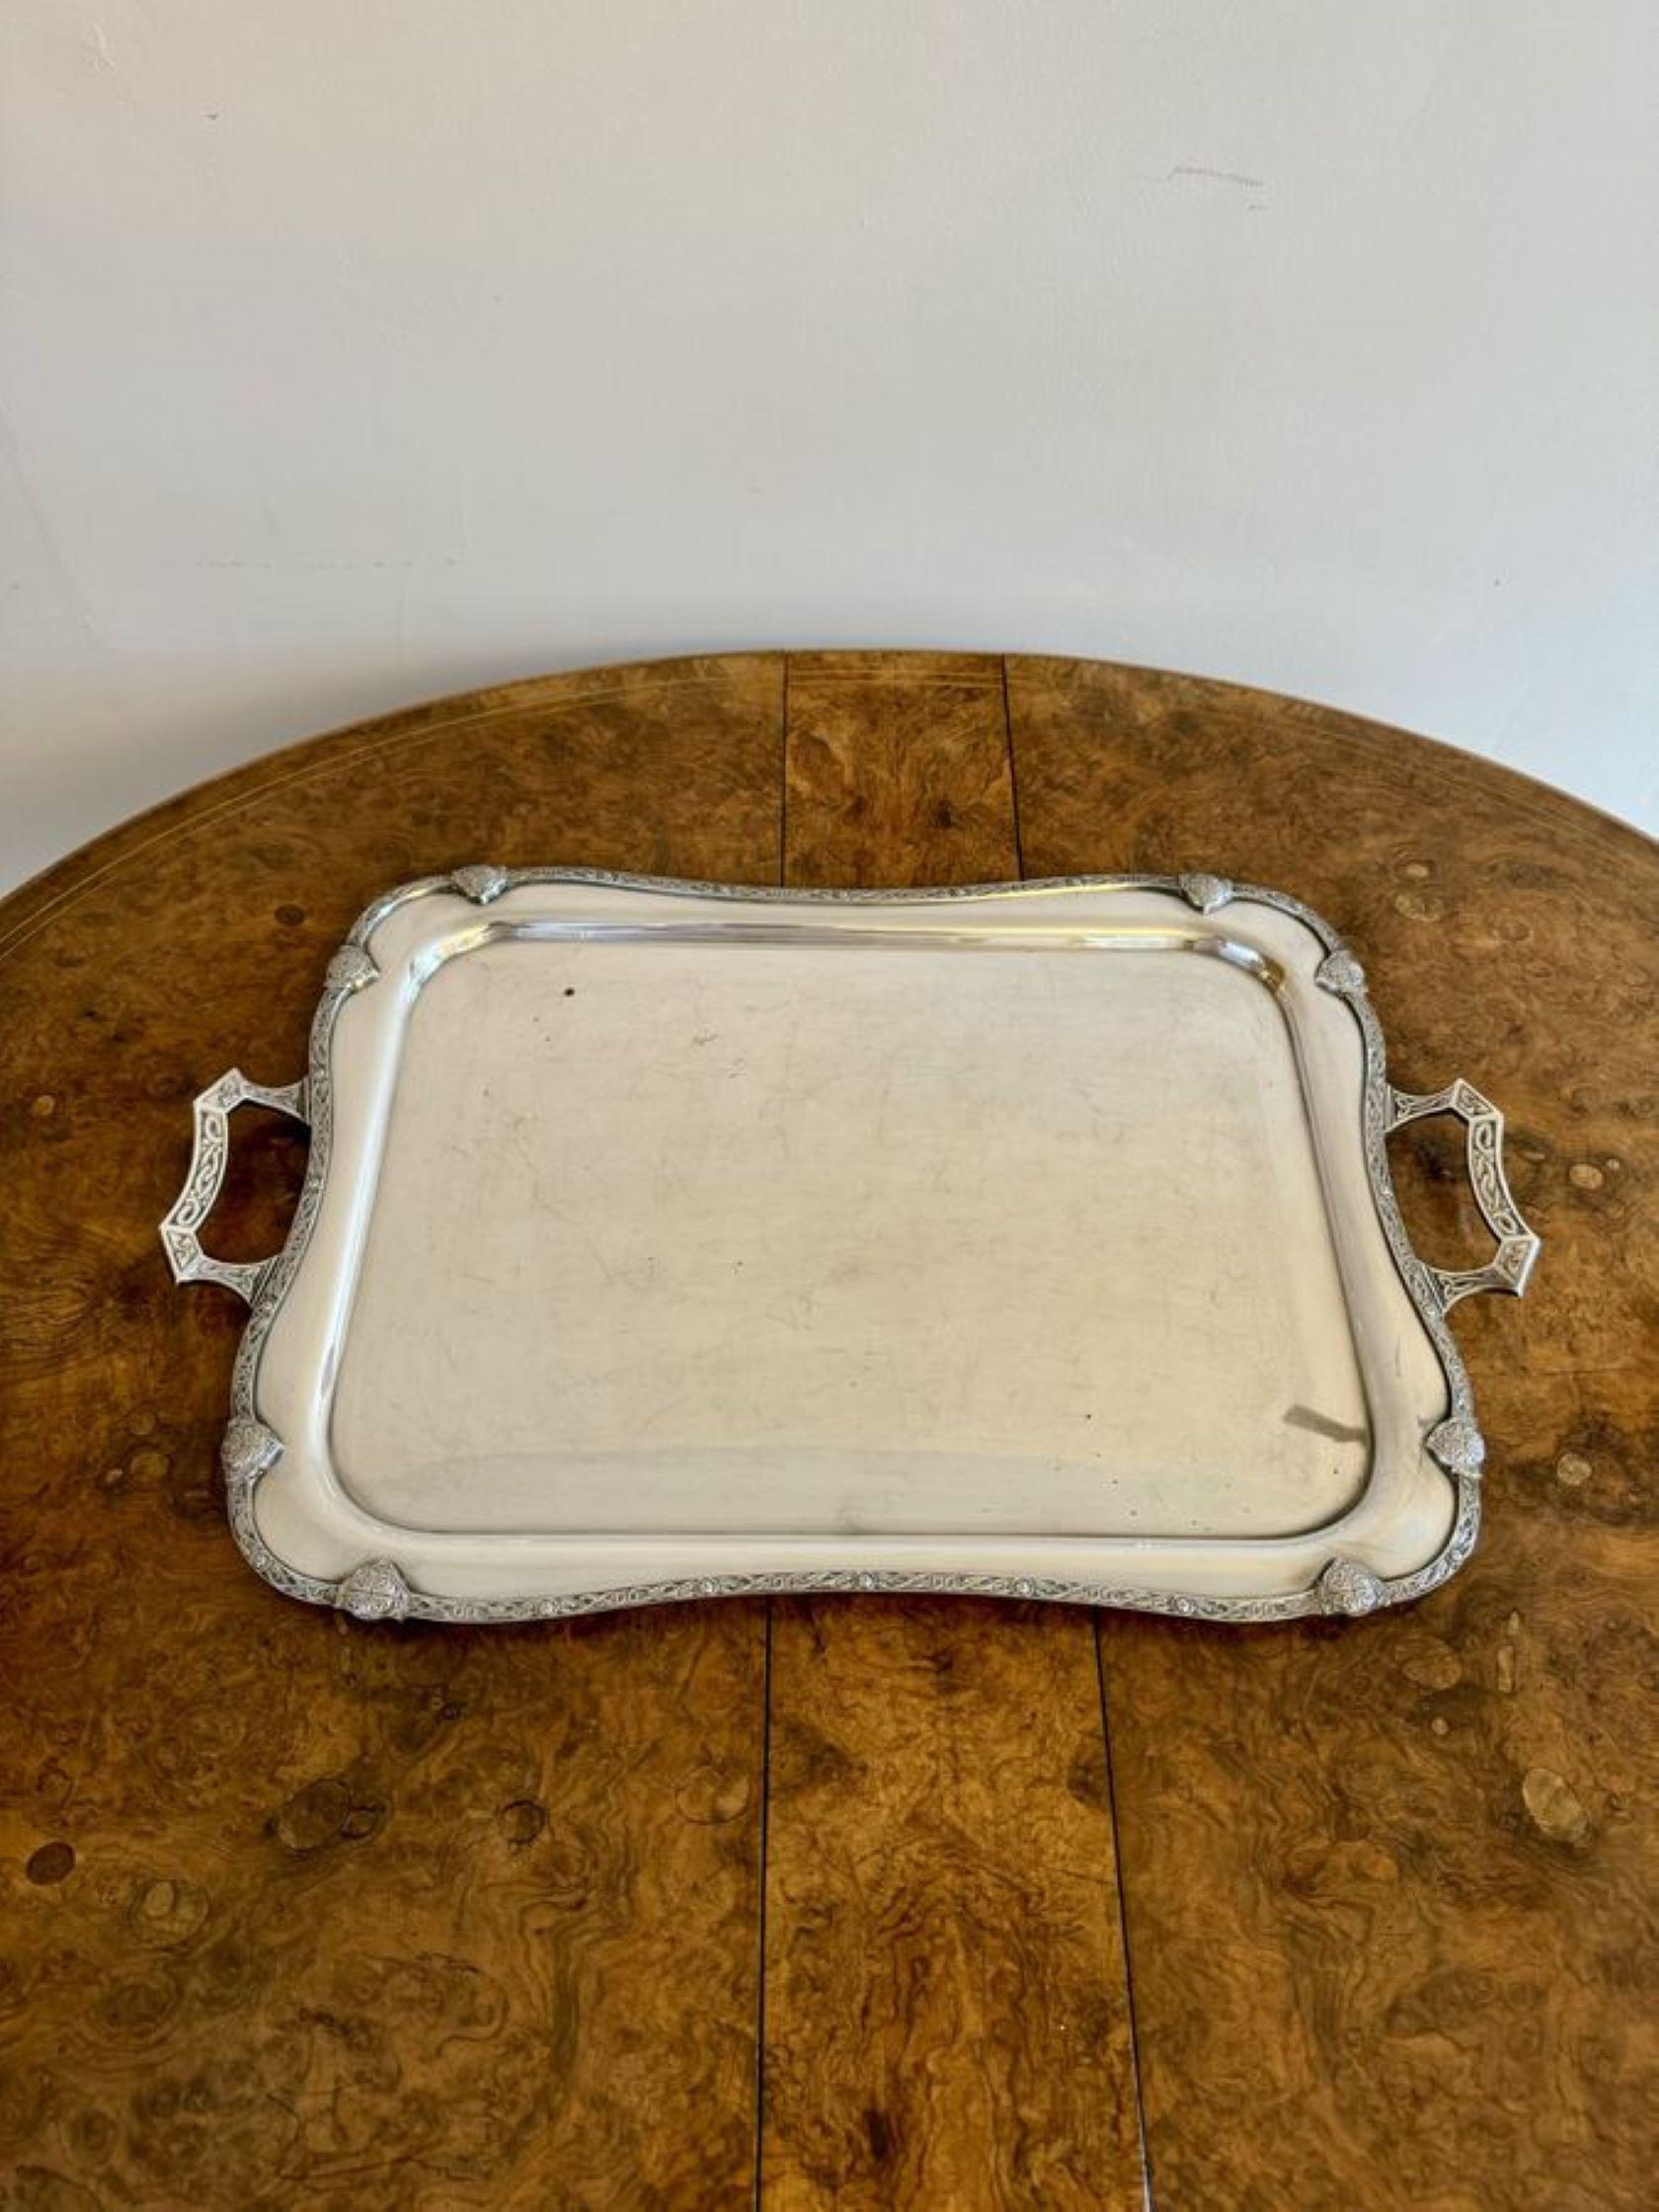 Large antique Edwardian silver plated tea tray, having a quality silver plated antique Edwardian tea tray, with two shaped ornate handles to the sides and an ornate border. 

D. 1900